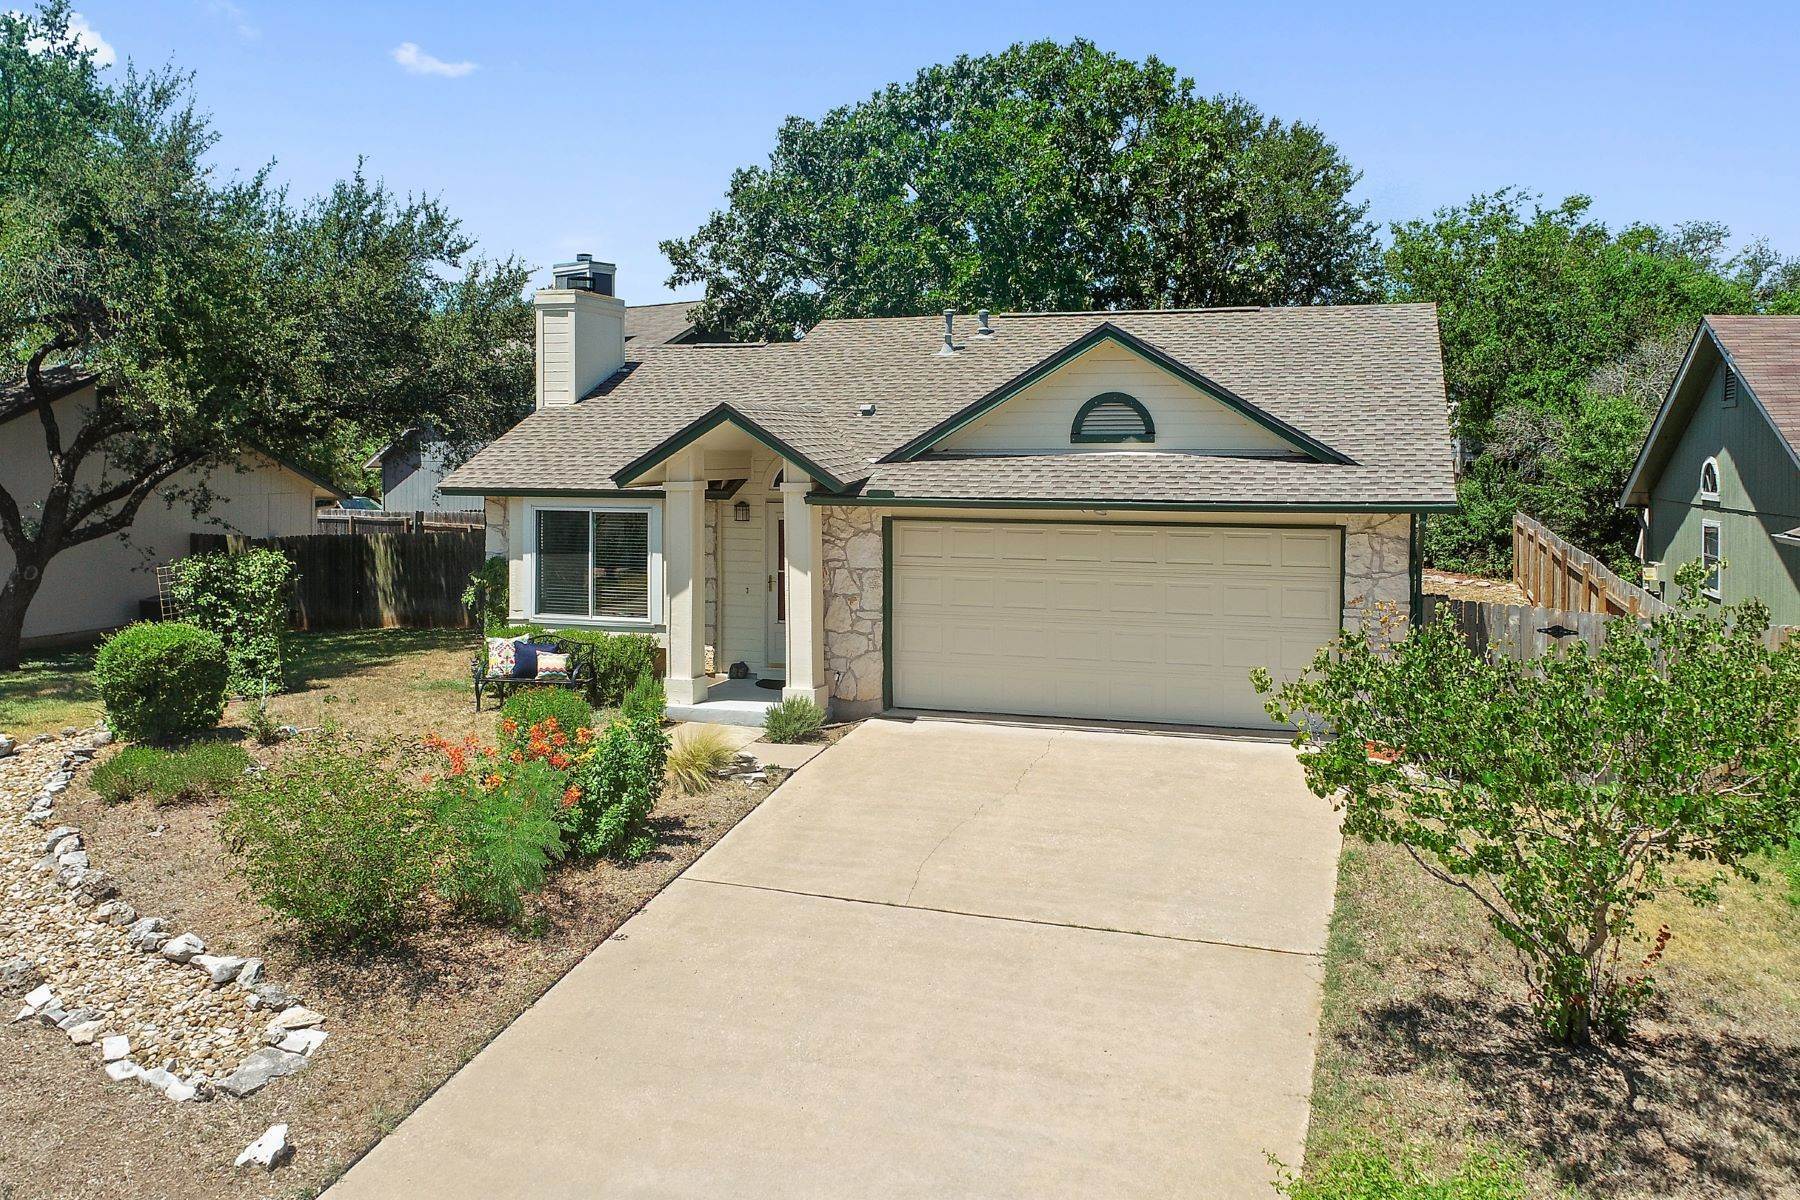 Single Family Homes for Sale at Charming Three Bedroom Two Bath Home 7914 Tiffany Drive Austin, Texas 78749 United States